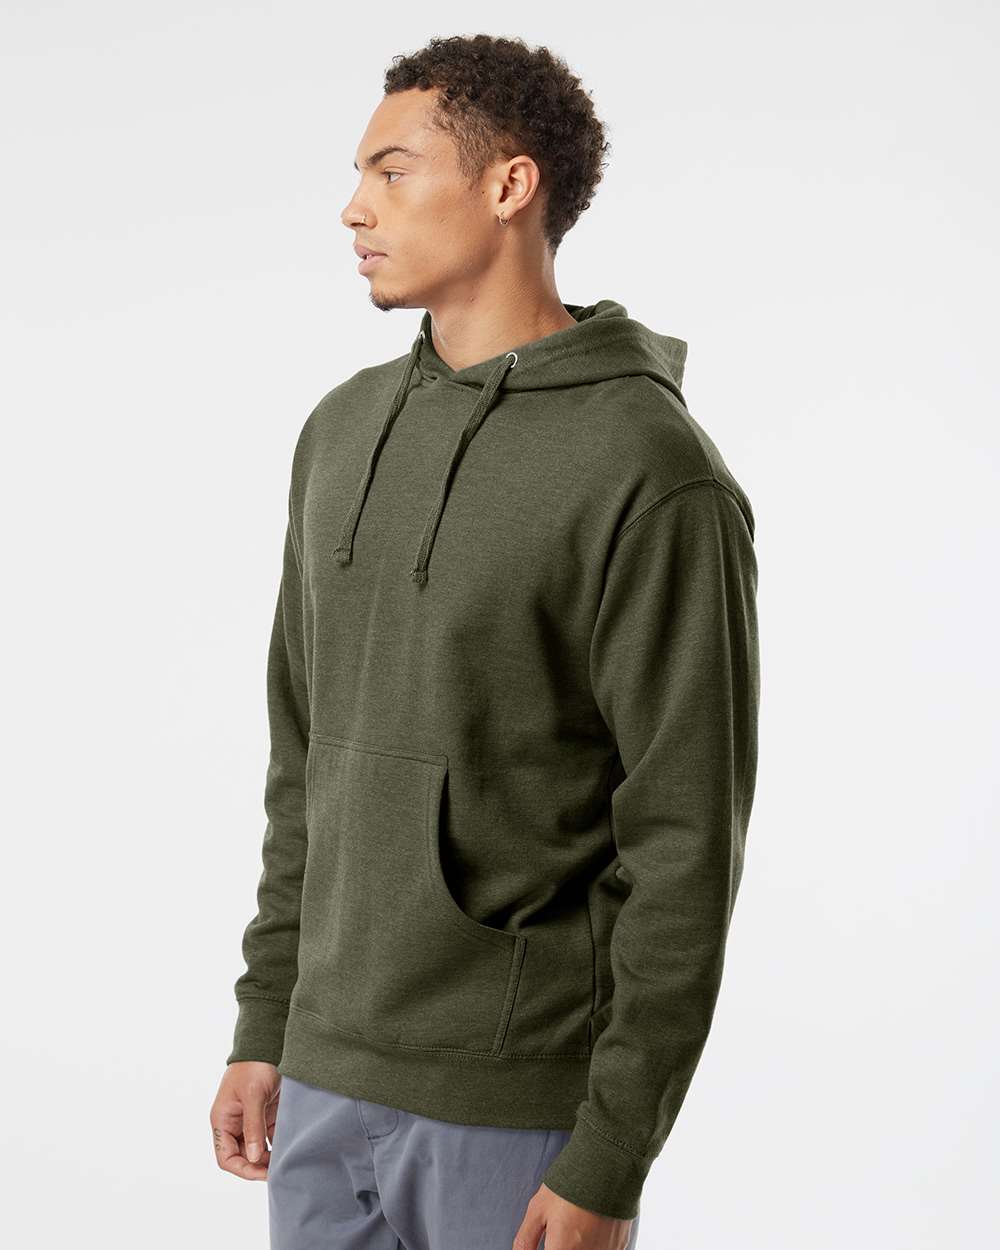 Independent Trading Co. Midweight Hooded Sweatshirt SS4500 #colormdl_Army Heather